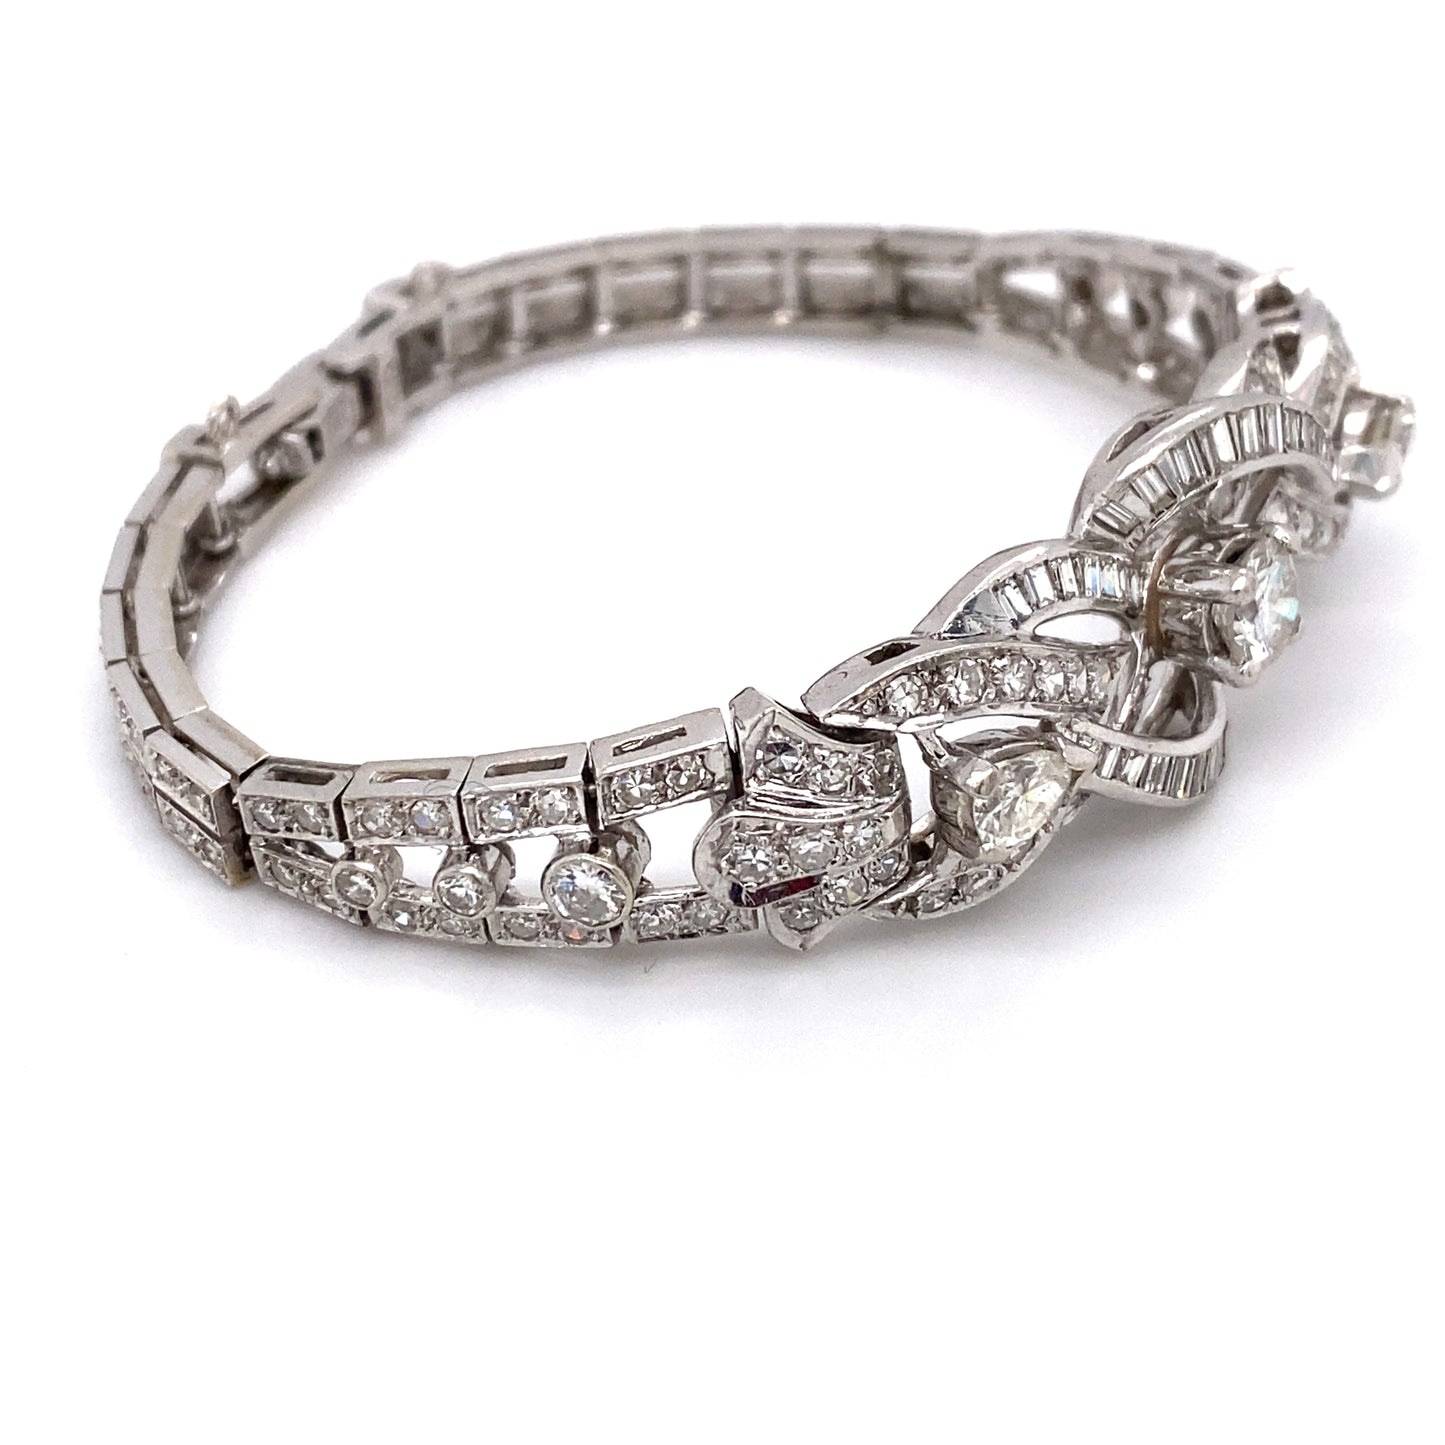 Circa 1950s 5 Carat Pear, Baguette and Round Diamond Bracelet in 14K White Gold